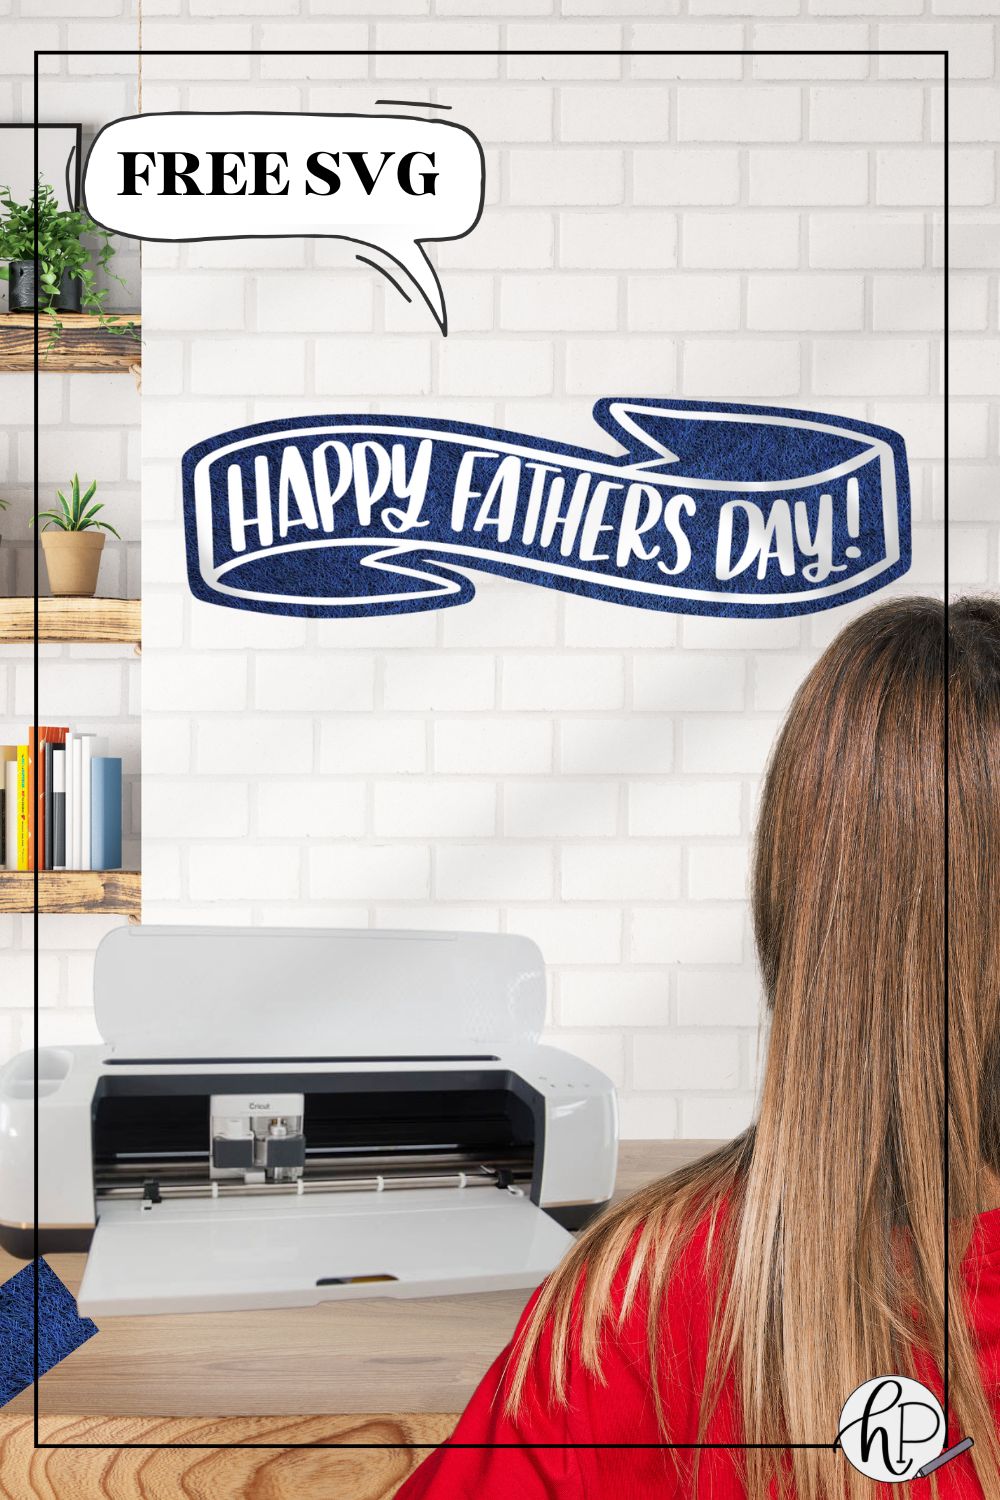 happy father's day 2 layer free SVG for cricut crafting used to make a blue felt banner with white iron on lettering and outline. Text over reads 'free svg' image shows the banner on a white brick wall behind a table with a cricut on it.